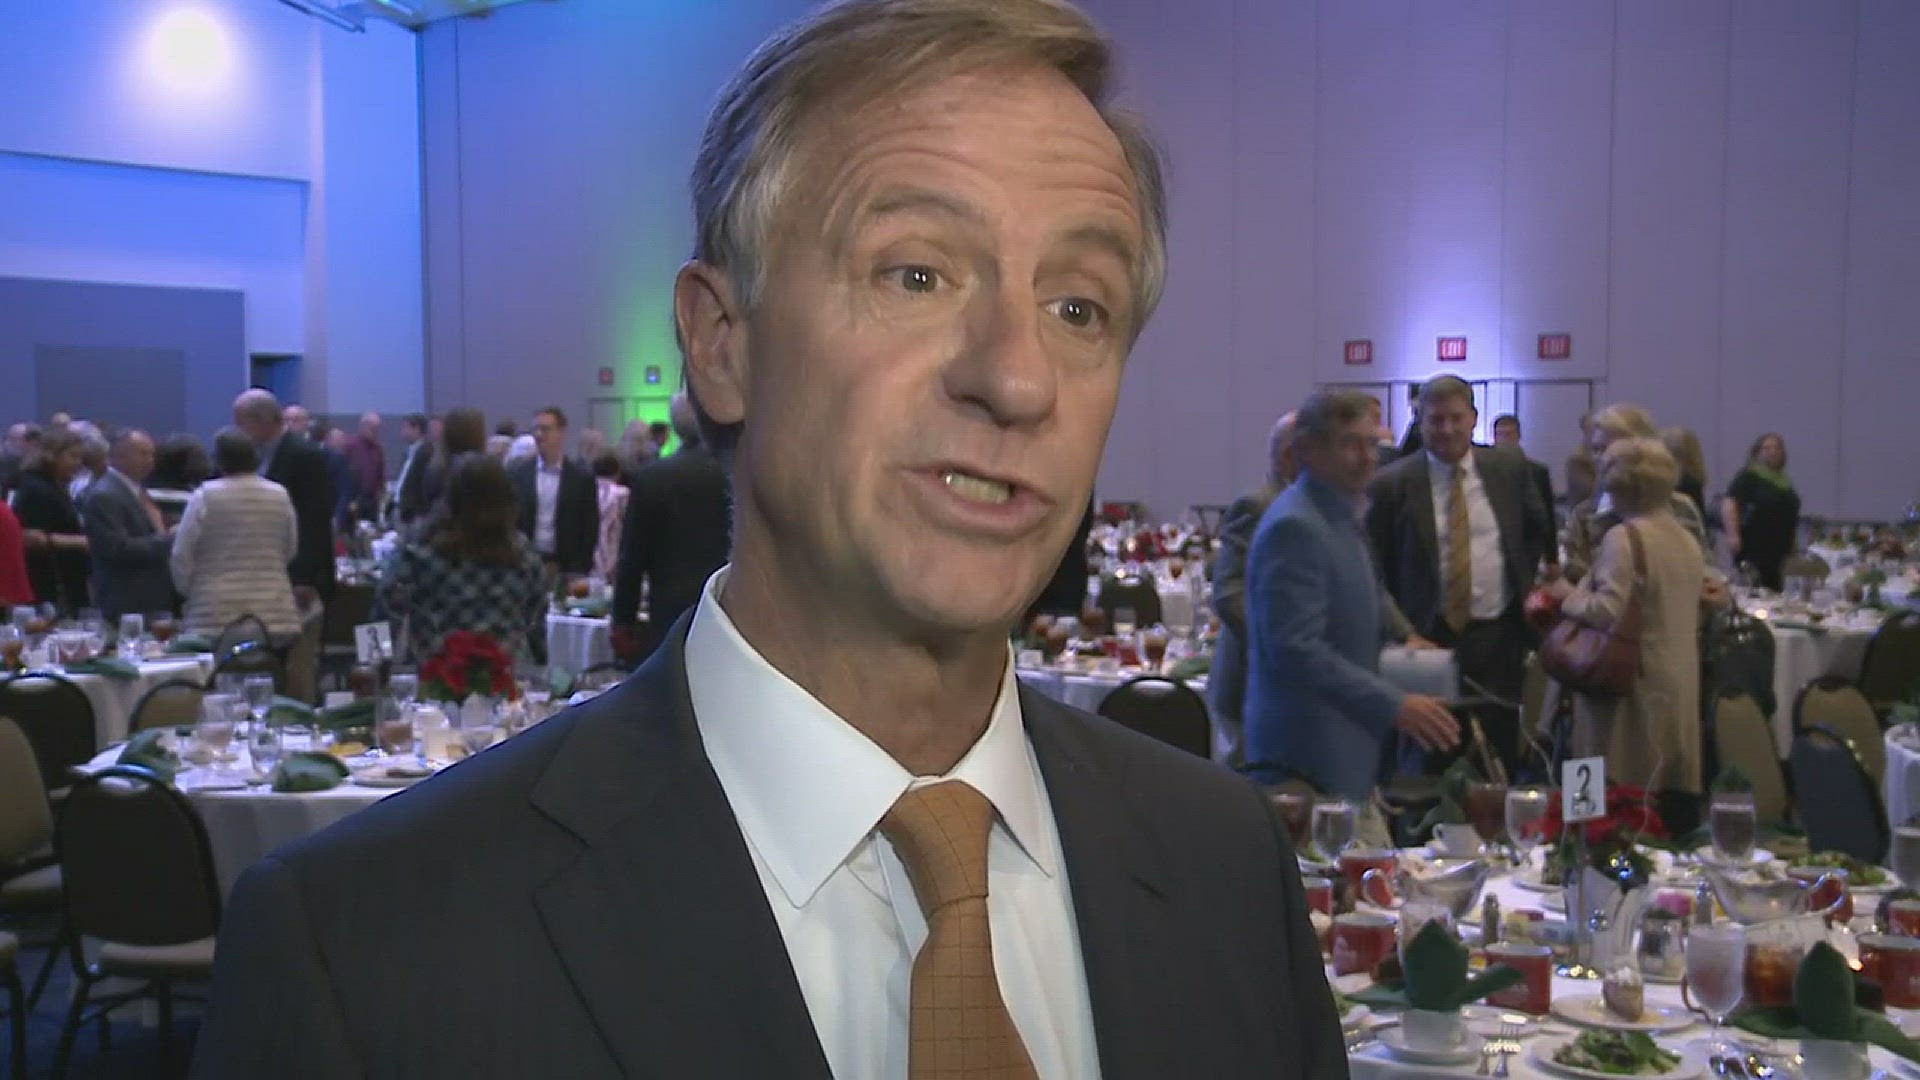 "This has obviously been a difficult week for the University of Tennessee athletics but I think the appropriate comment should come from the Chancellor's Office," Haslam said.